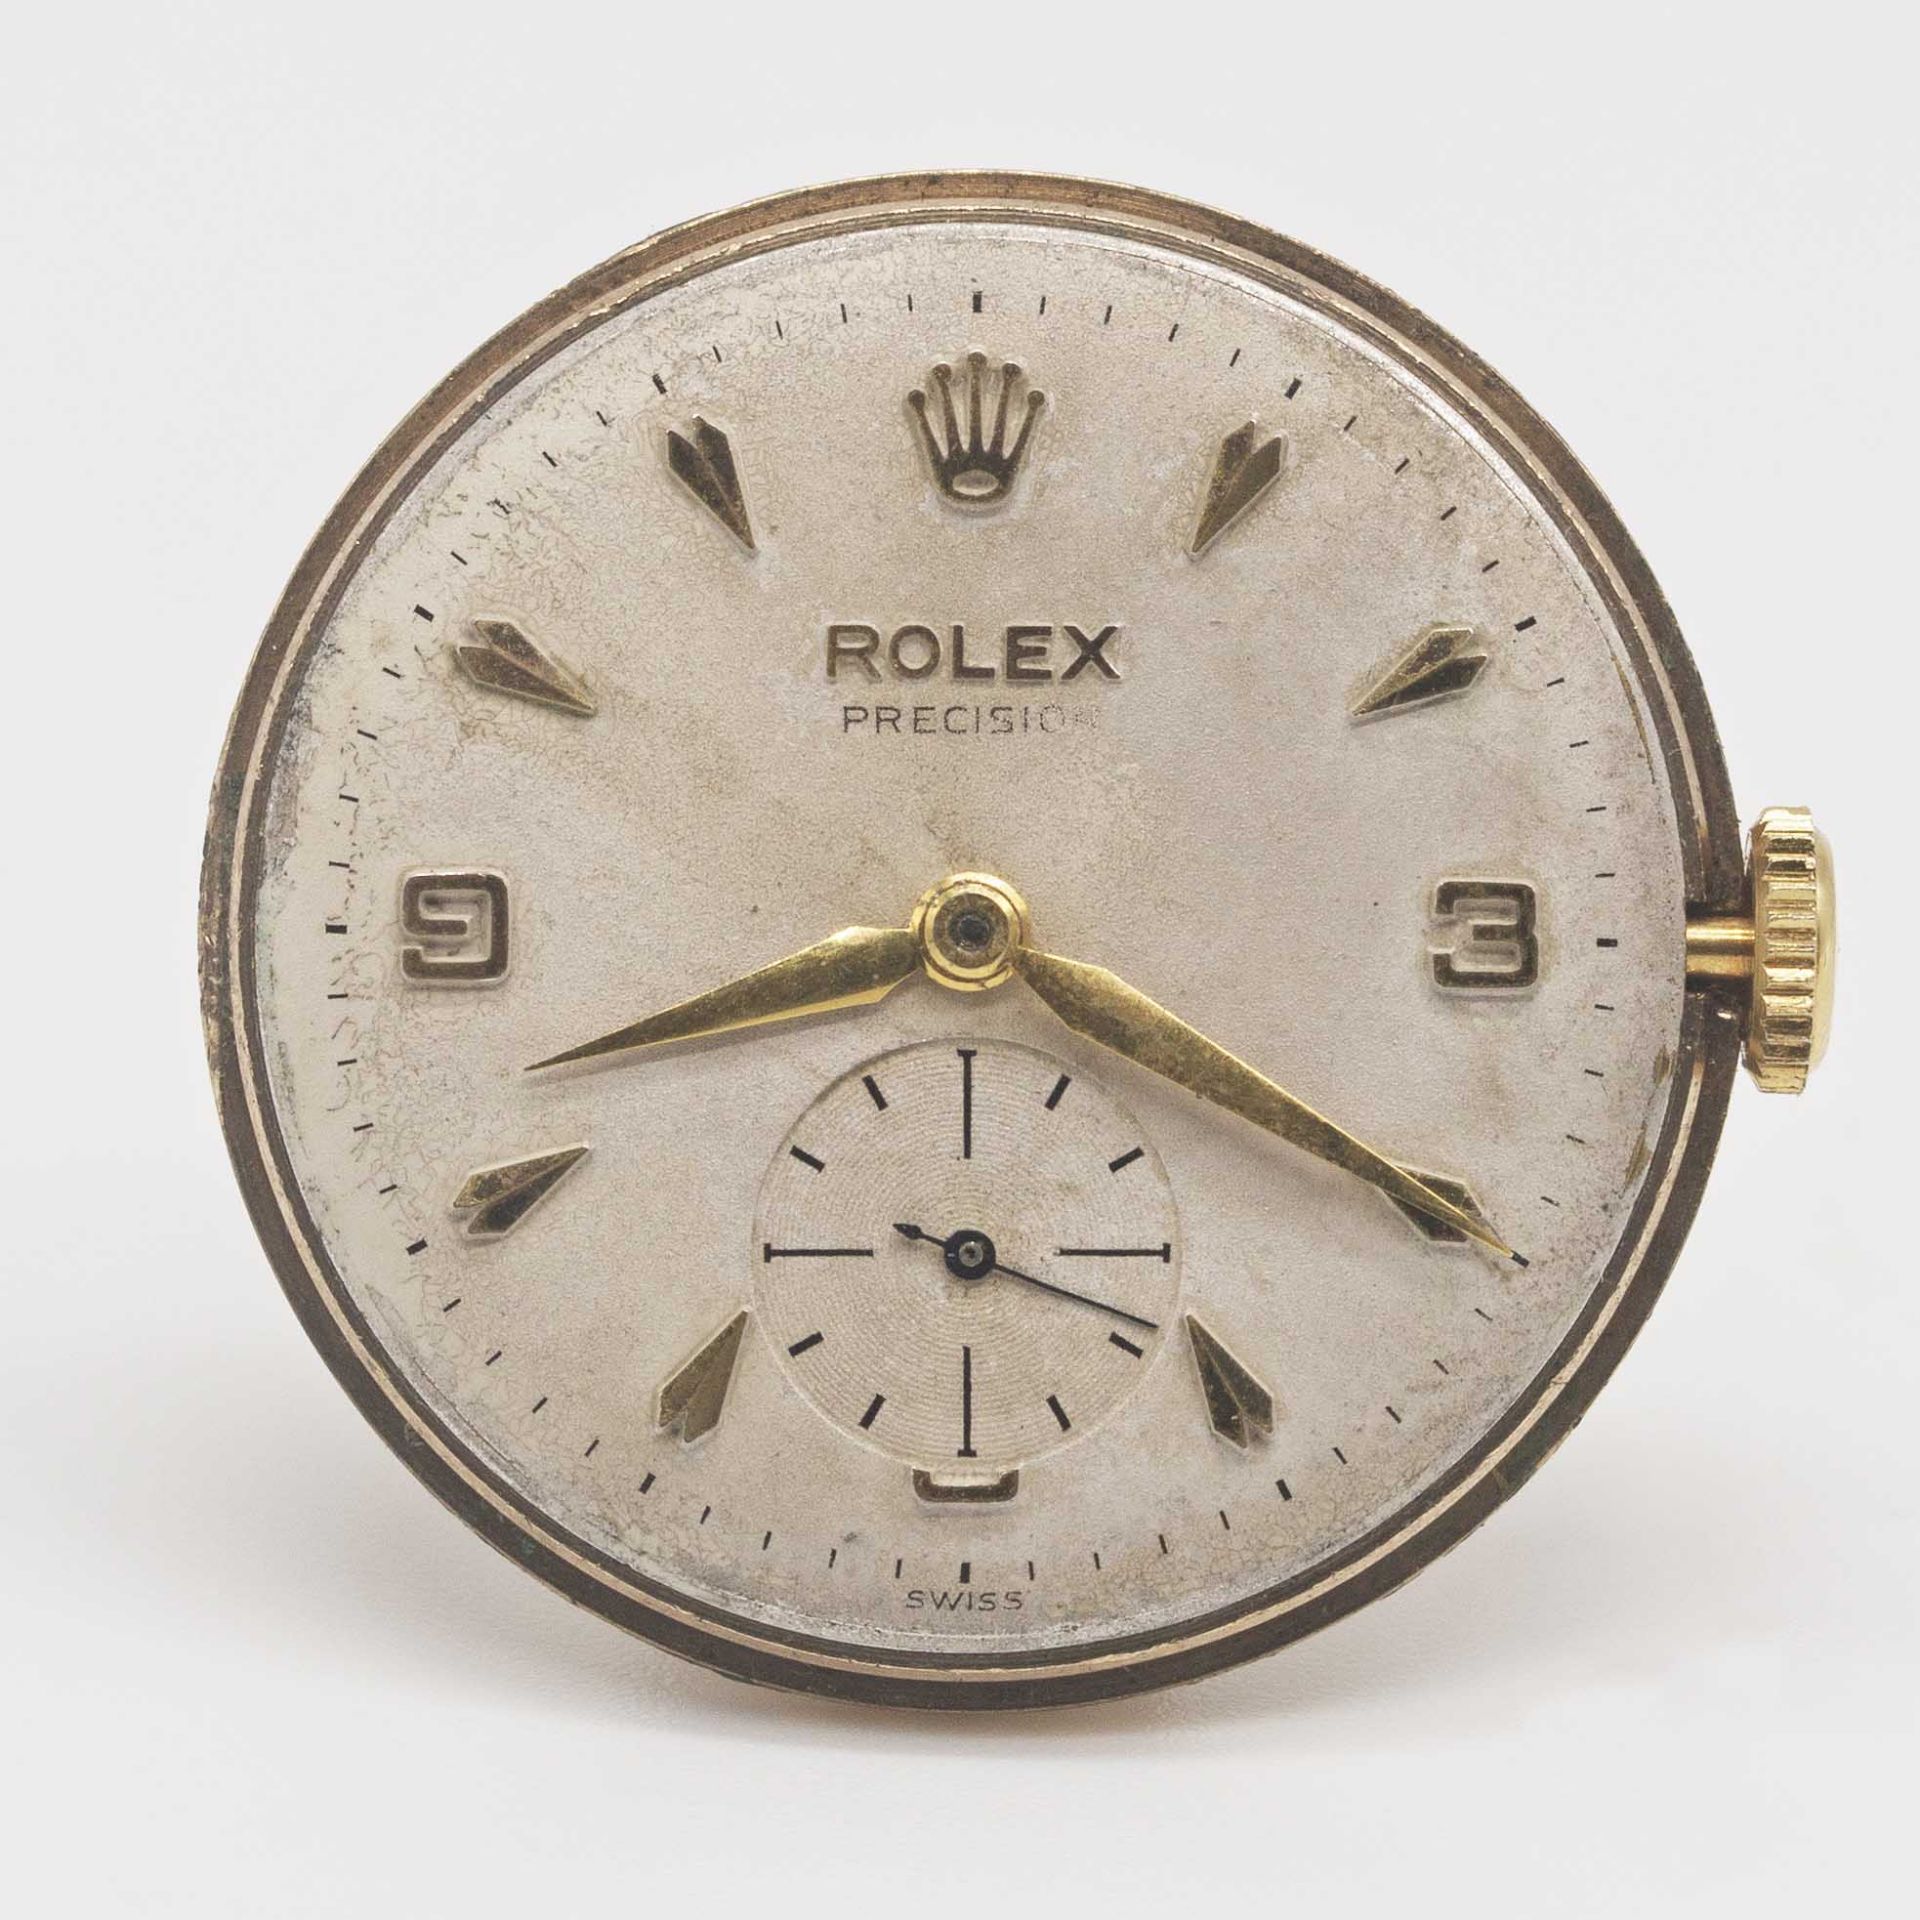 A GENTLEMAN'S 9CT SOLID GOLD ROLEX PRECISION WRIST WATCH CIRCA 1958 Movement: 17J, manual wind, cal. - Image 7 of 10